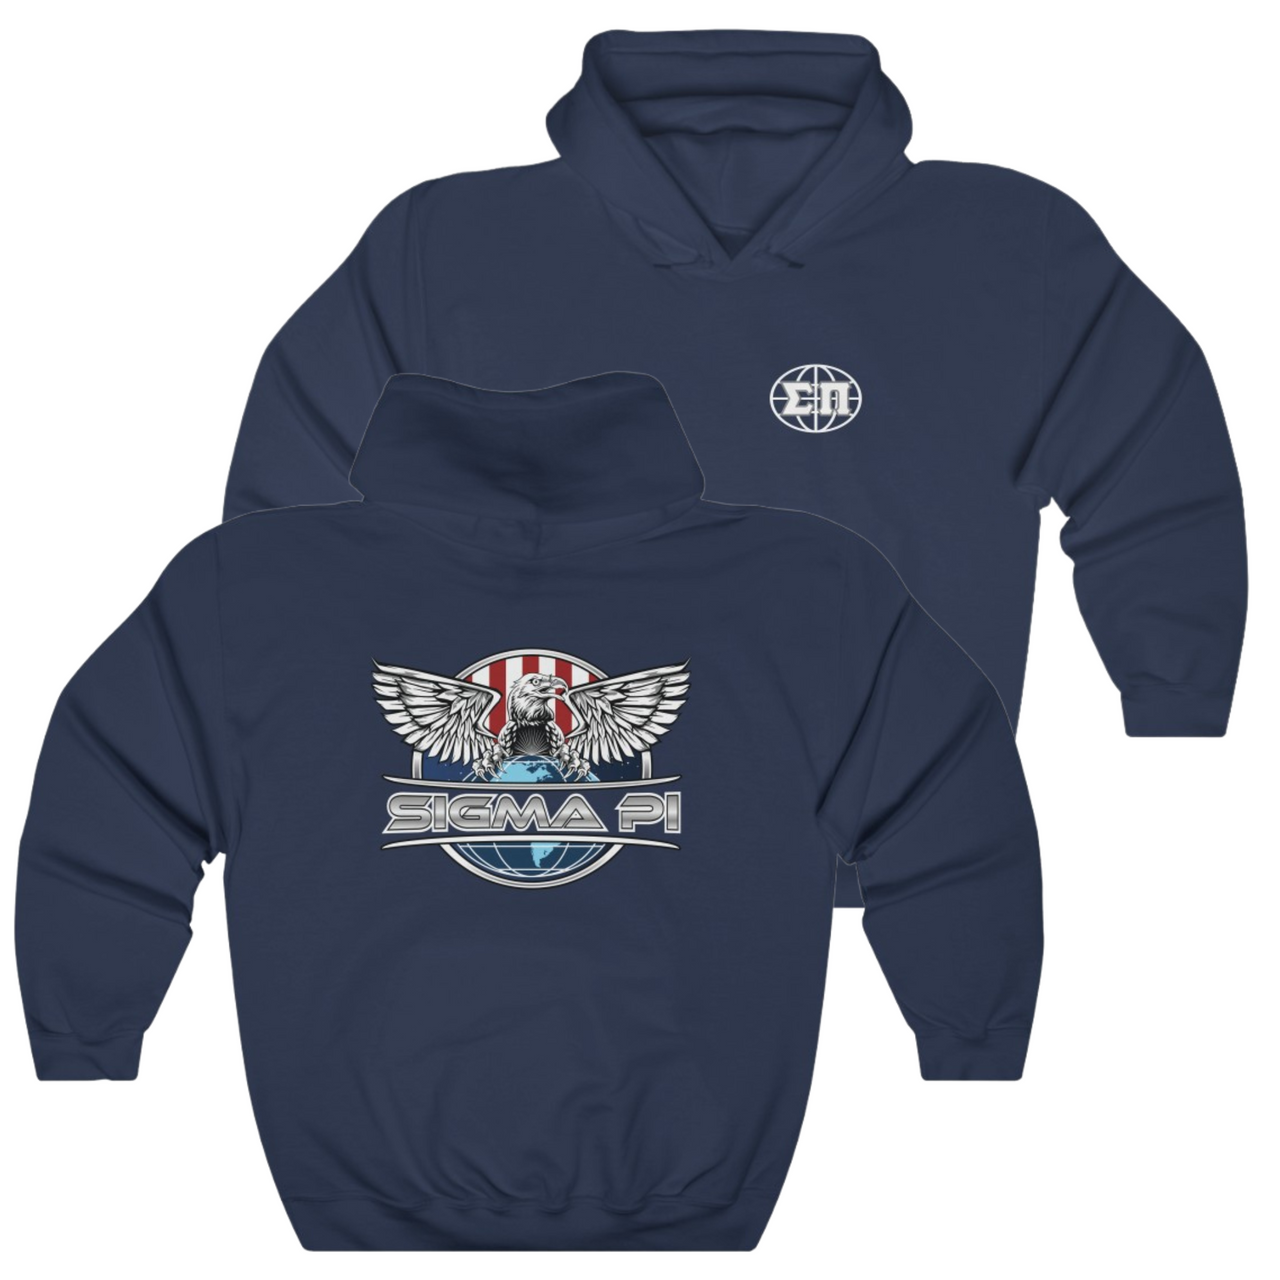 Navy Sigma Pi Graphic Hoodie | The Fraternal Order | Sigma Pi Apparel and Merchandise 